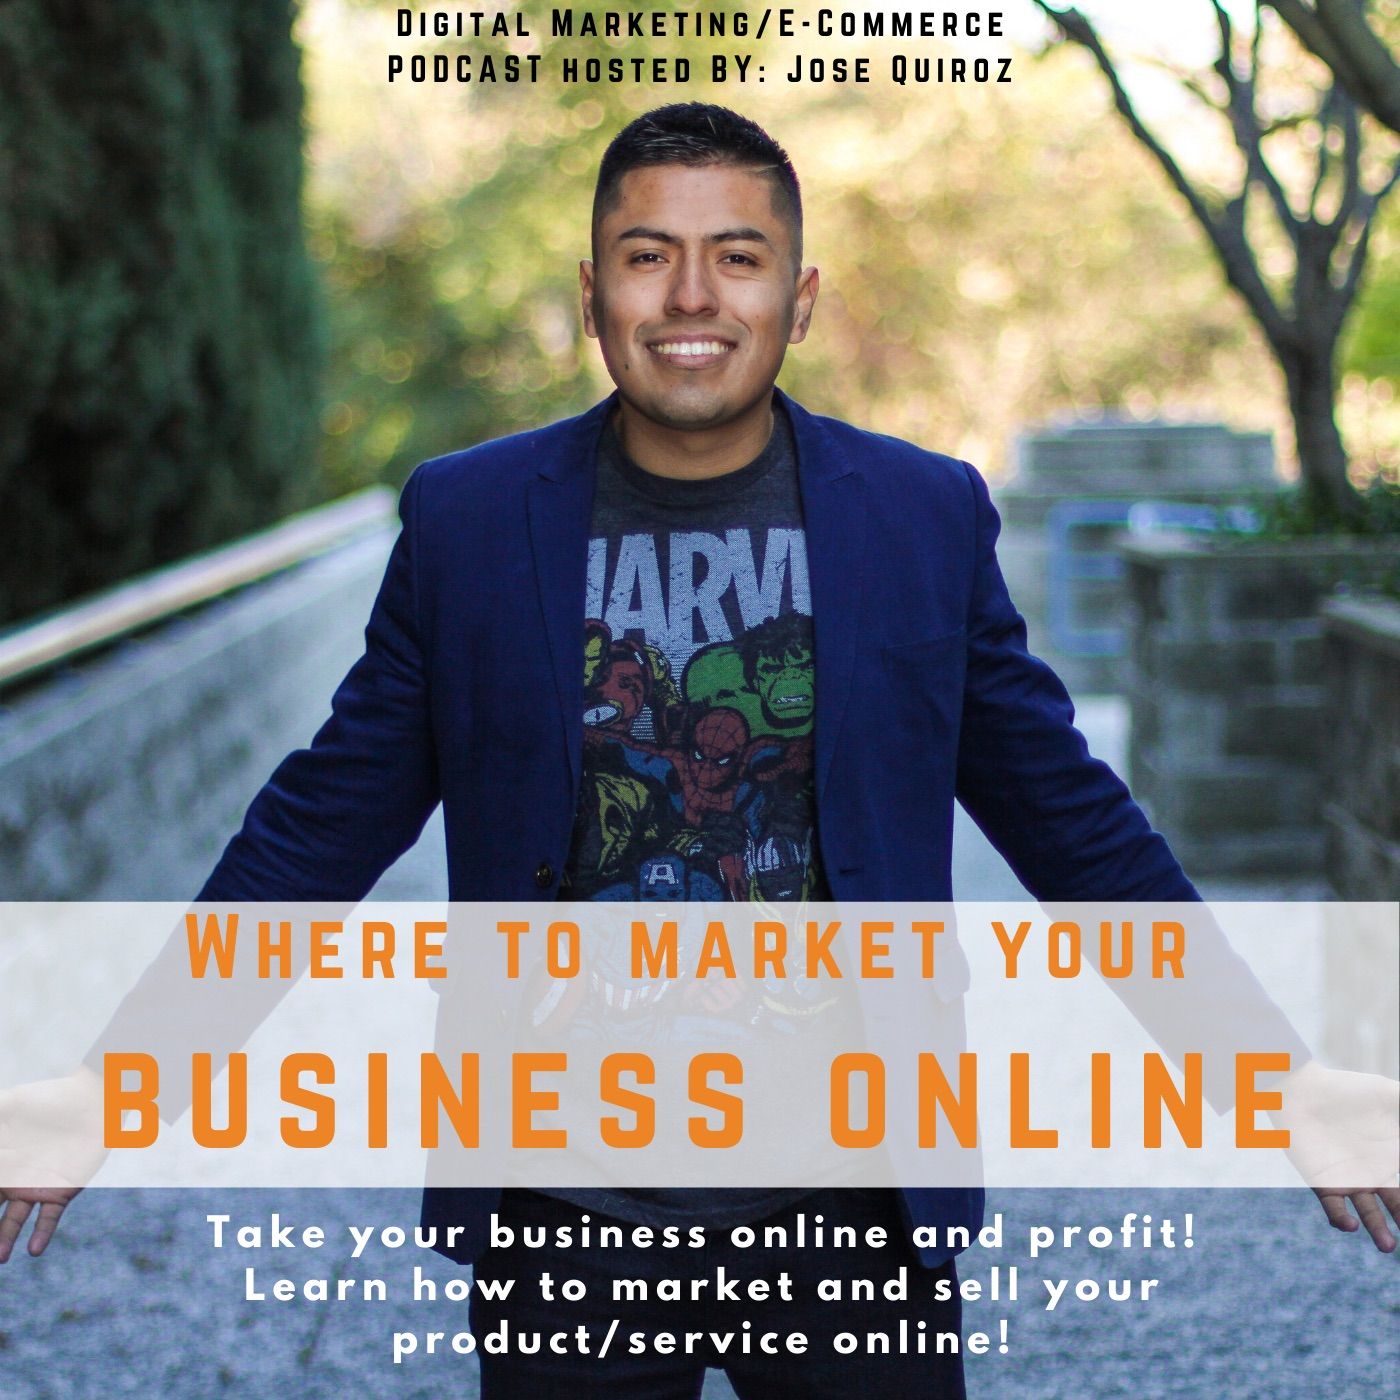 Where To Market Your Business Online